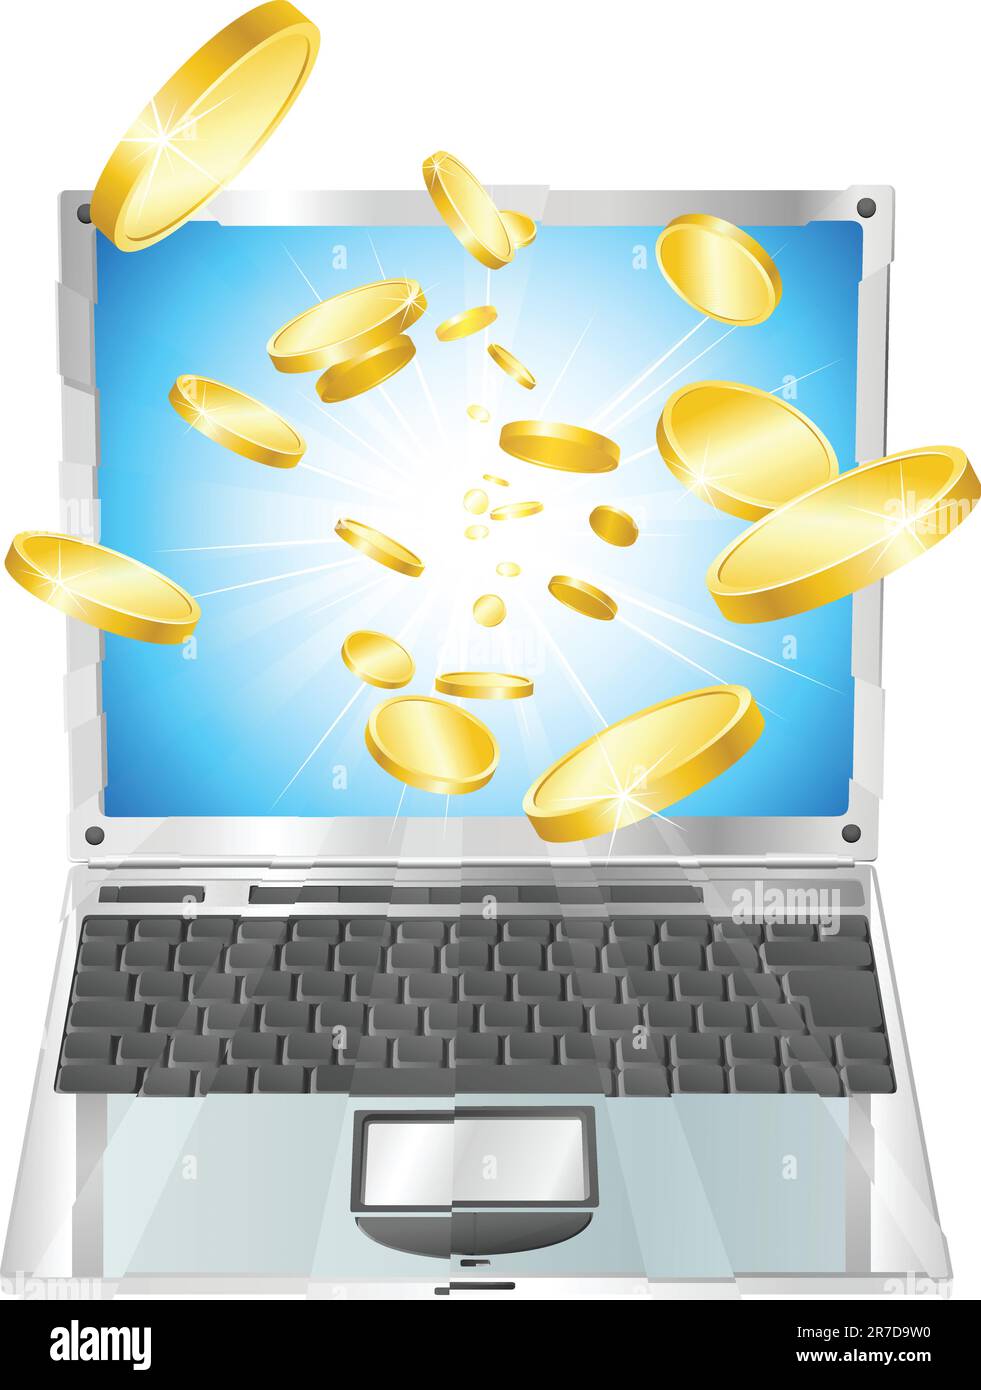 Conceptual illustration. Money in form of gold coins flying out of laptop computer. Stock Vector